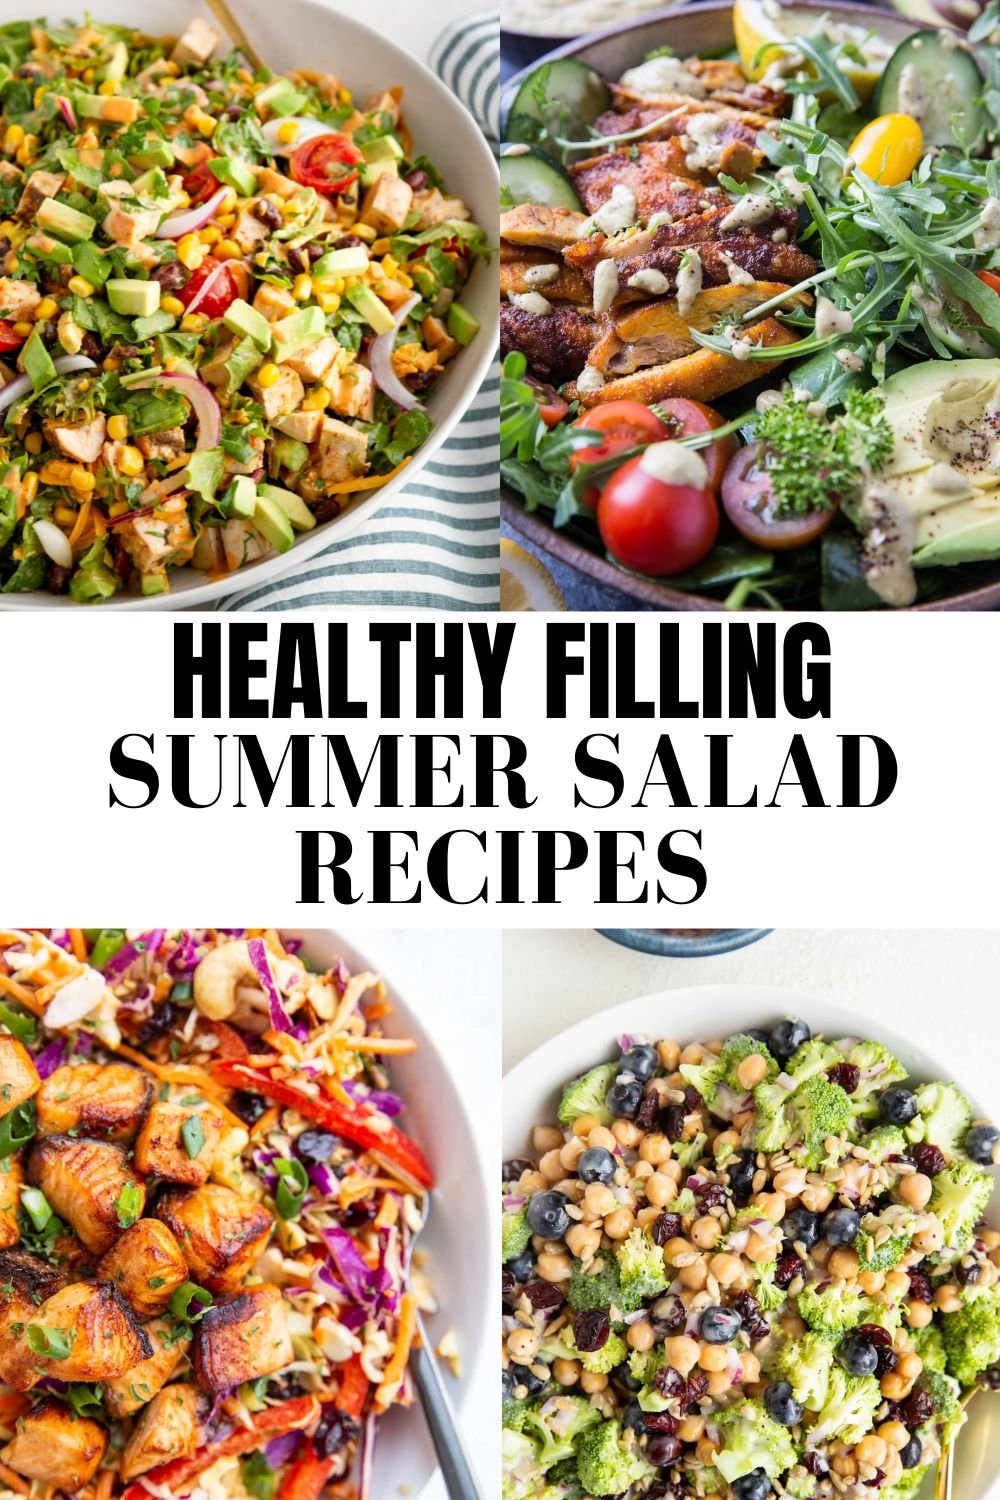 22 Filling Entree Summer Salad Recipes to keep you feeling satisfied during the hot summer months! Beat the heat with these healthy, colorful, anti-inflammatory delicious summer salads!